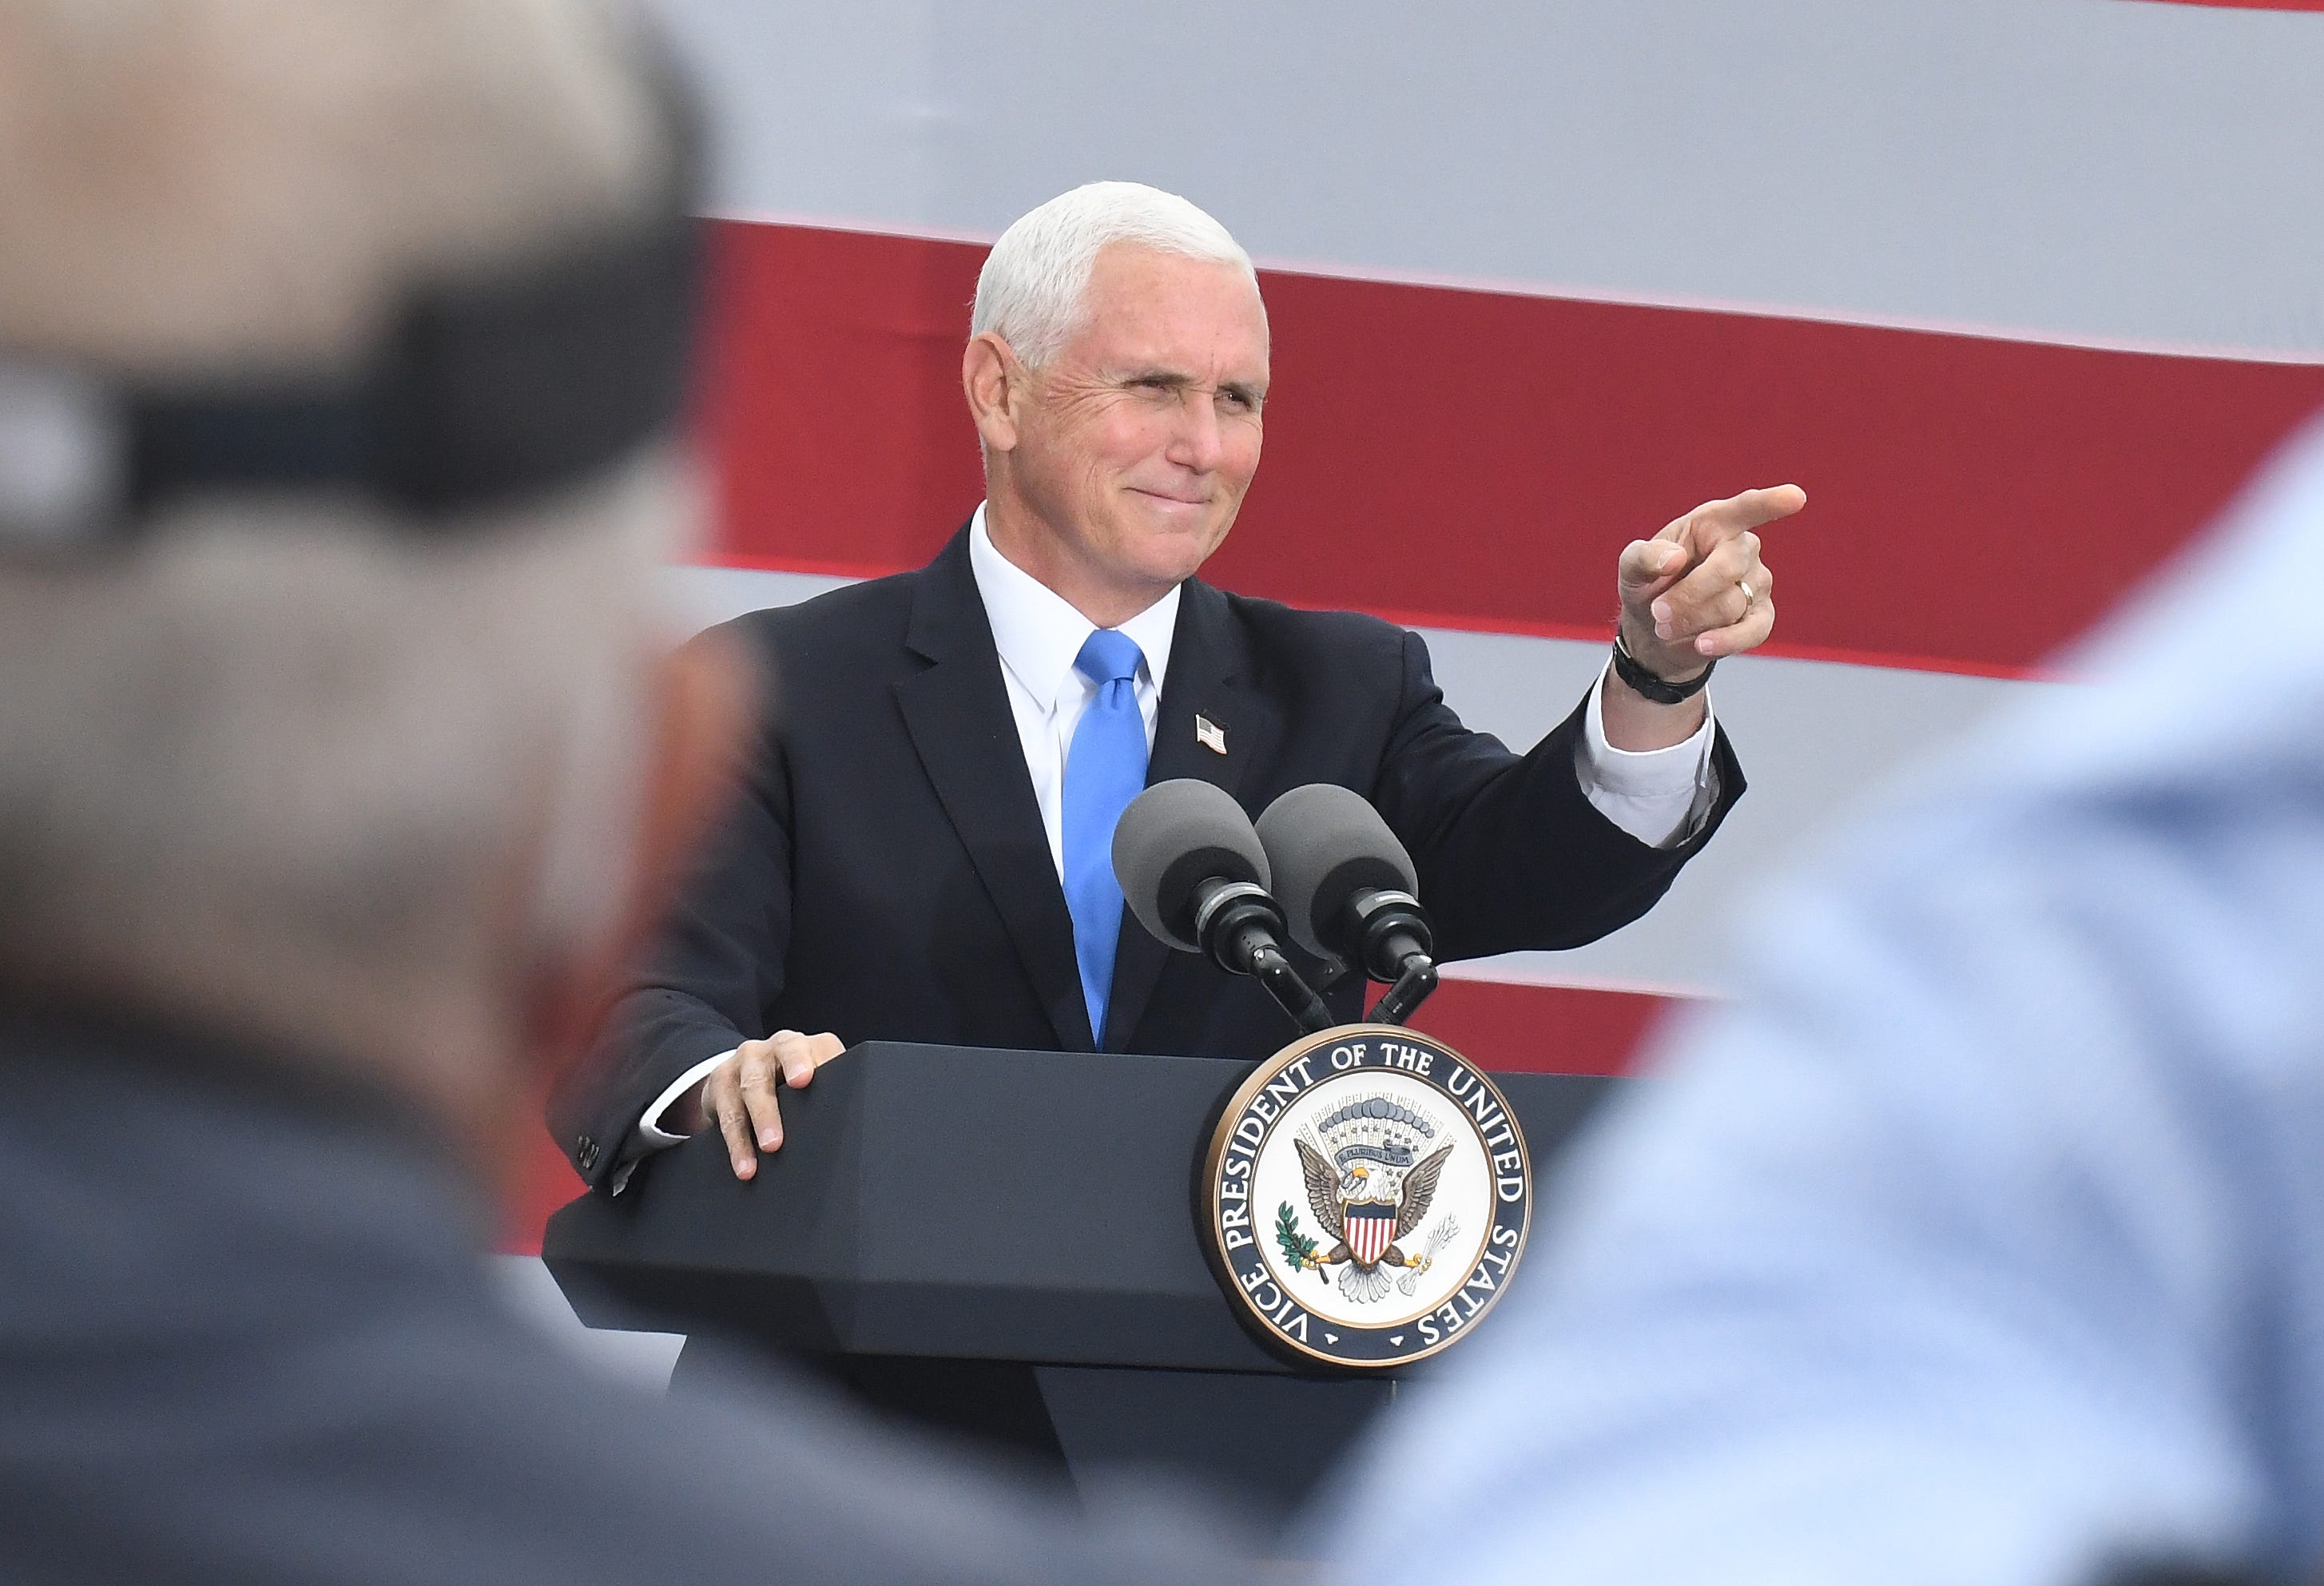 Vice President Mike Pence holds an outdoor campaign stop at Lacks Enterprises Inc. in Grand Rapids, Michigan on October 14, 2020.